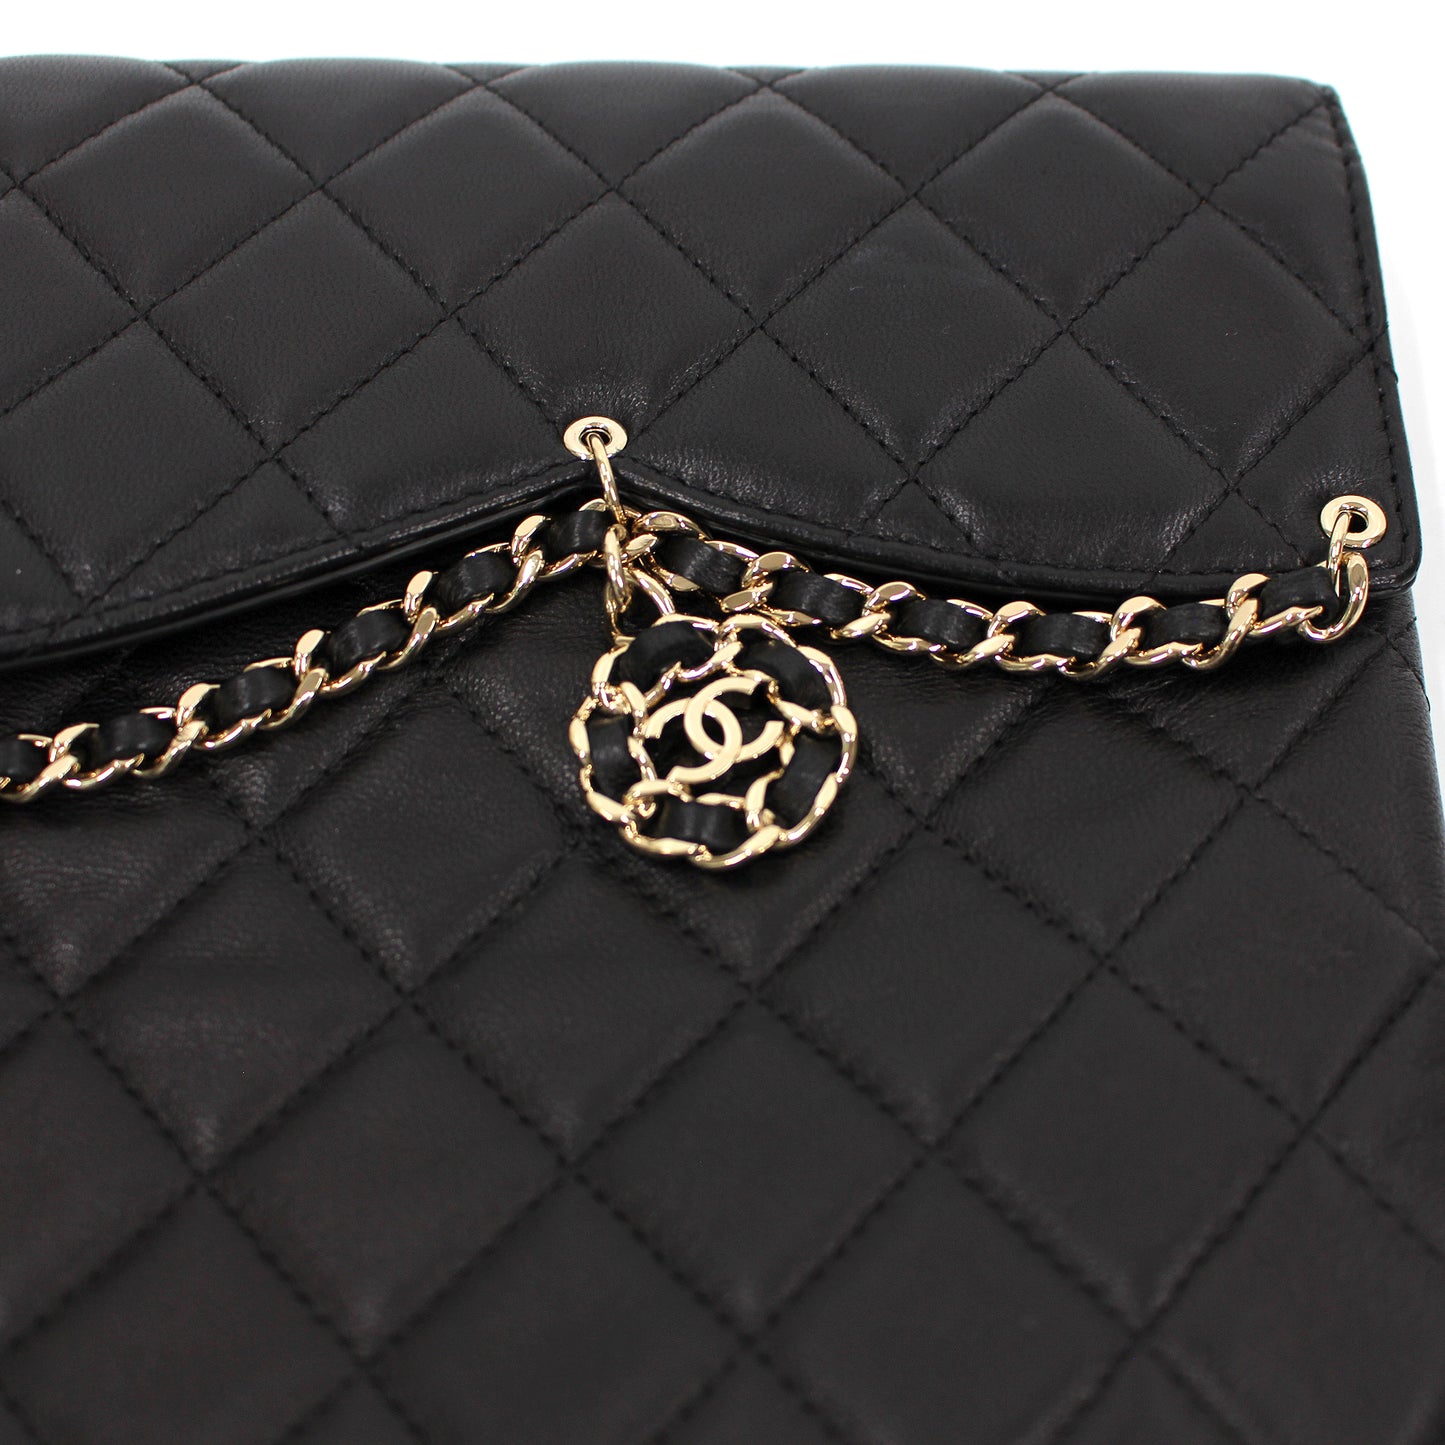 Chanel Quilted Chainlink Clutch